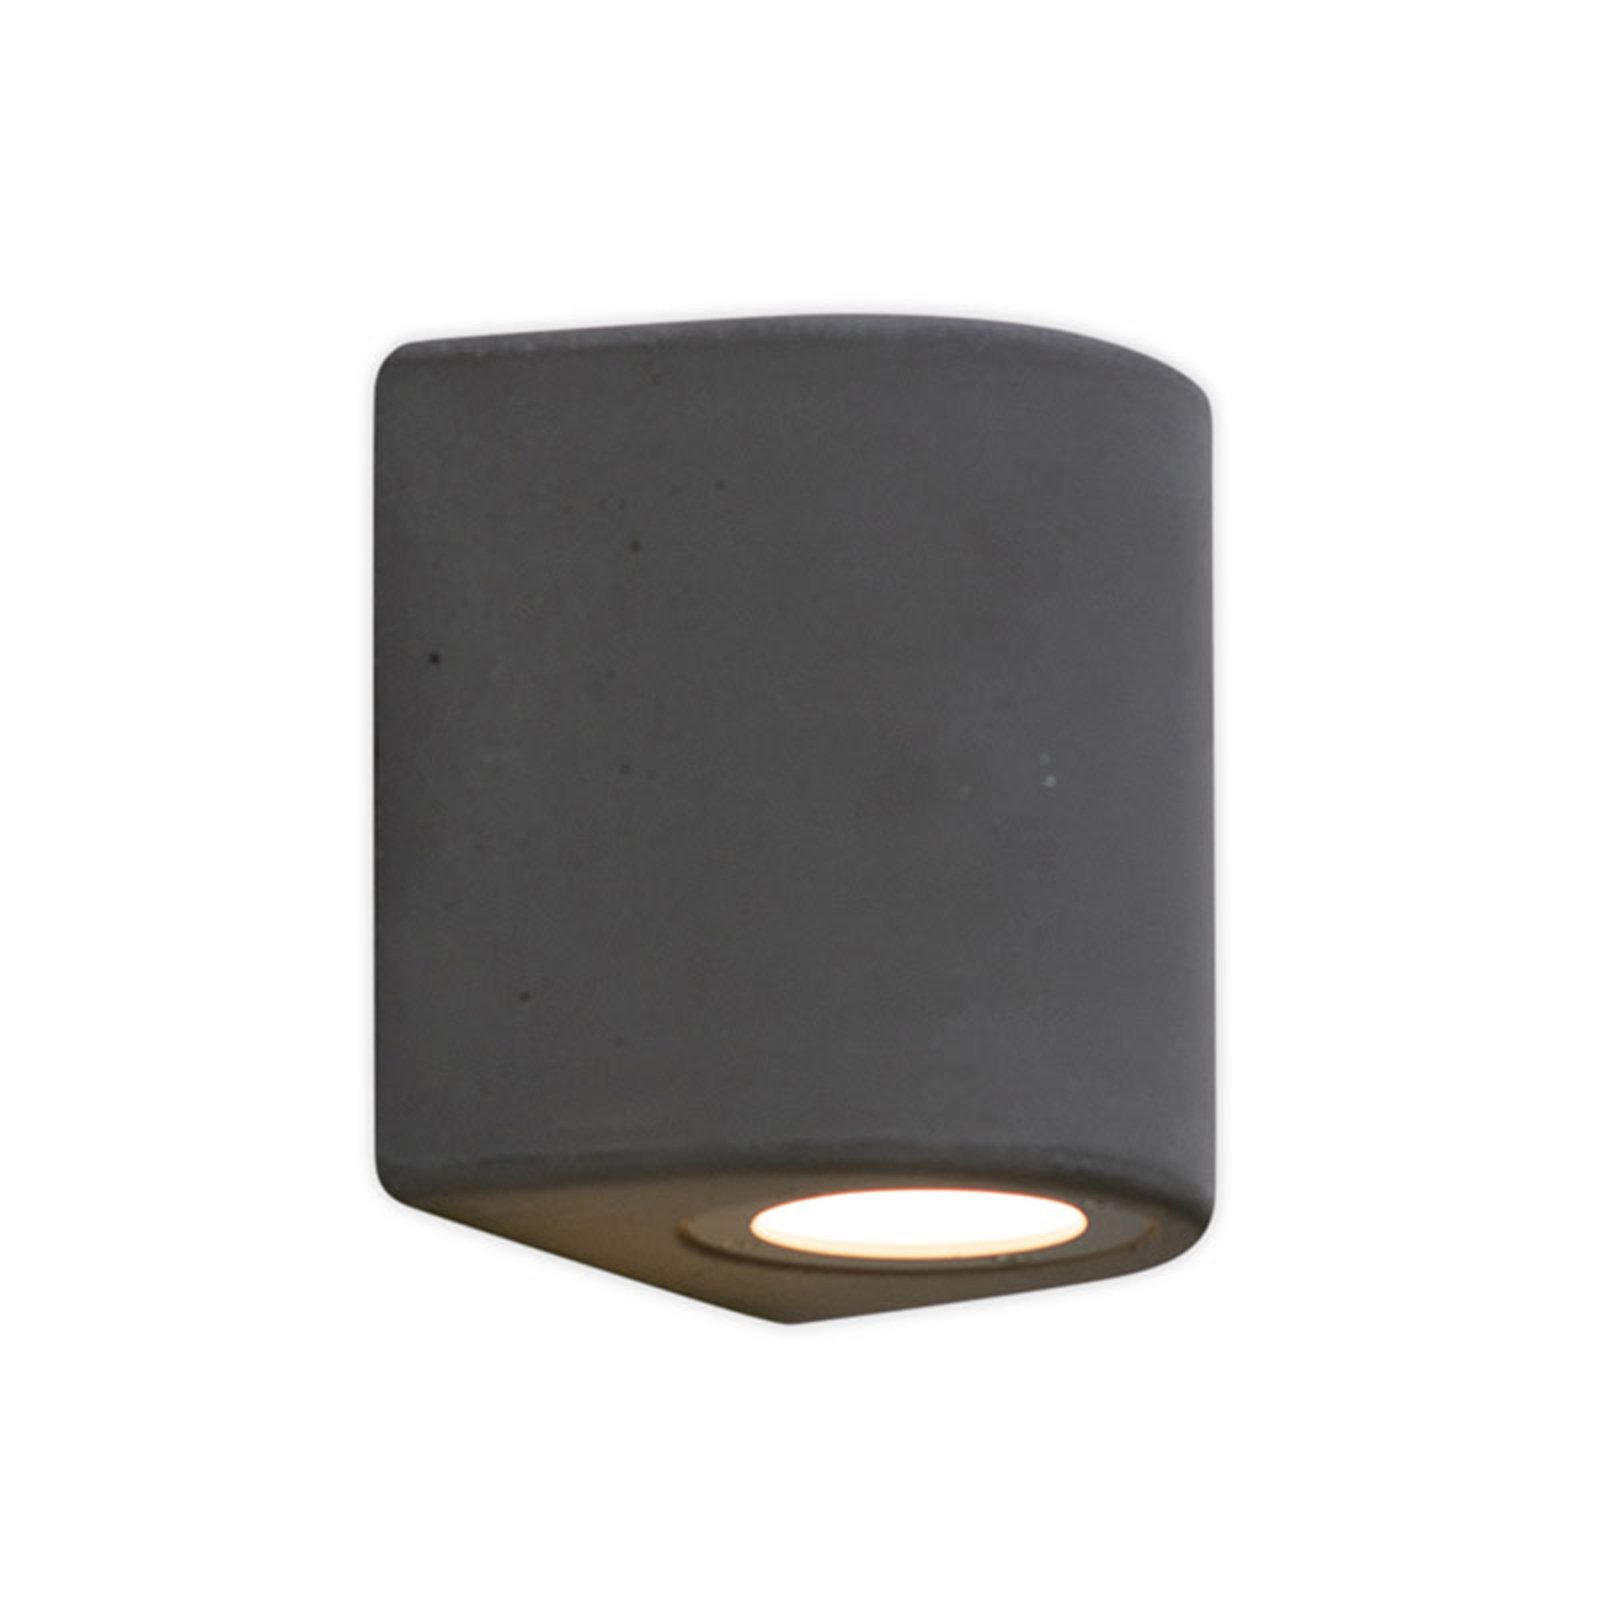 Martinelli Luce Maniela LED wall light, up/down